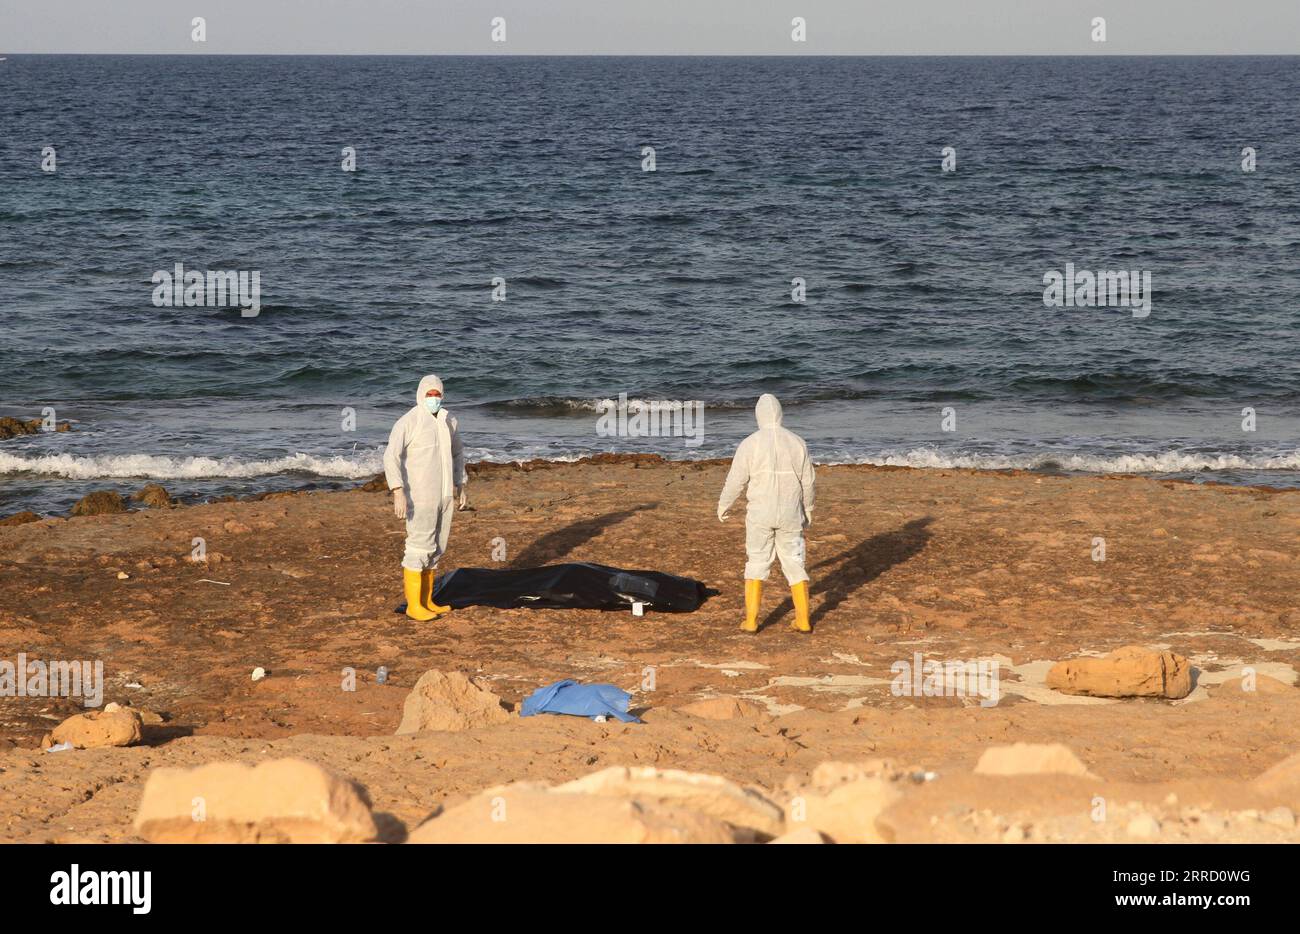 211126 -- TRIPOLI, Nov. 26, 2021 -- The Libyan Red Crescent staff exhume the body of illegal immigrant who drowned at sea off the coast of the western Libyan city of Sabratha, Nov. 25, 2021. The International Organization for Migration IOM on Nov. 20 said more than 75 illegal immigrants have drowned at sea off the coast of western Libya, while trying to reach Europe. Photo by /Xinhua LIBYA-SABRATHA-IMMIGRANTS-DROWNING HamzaxTurkia PUBLICATIONxNOTxINxCHN Stock Photo